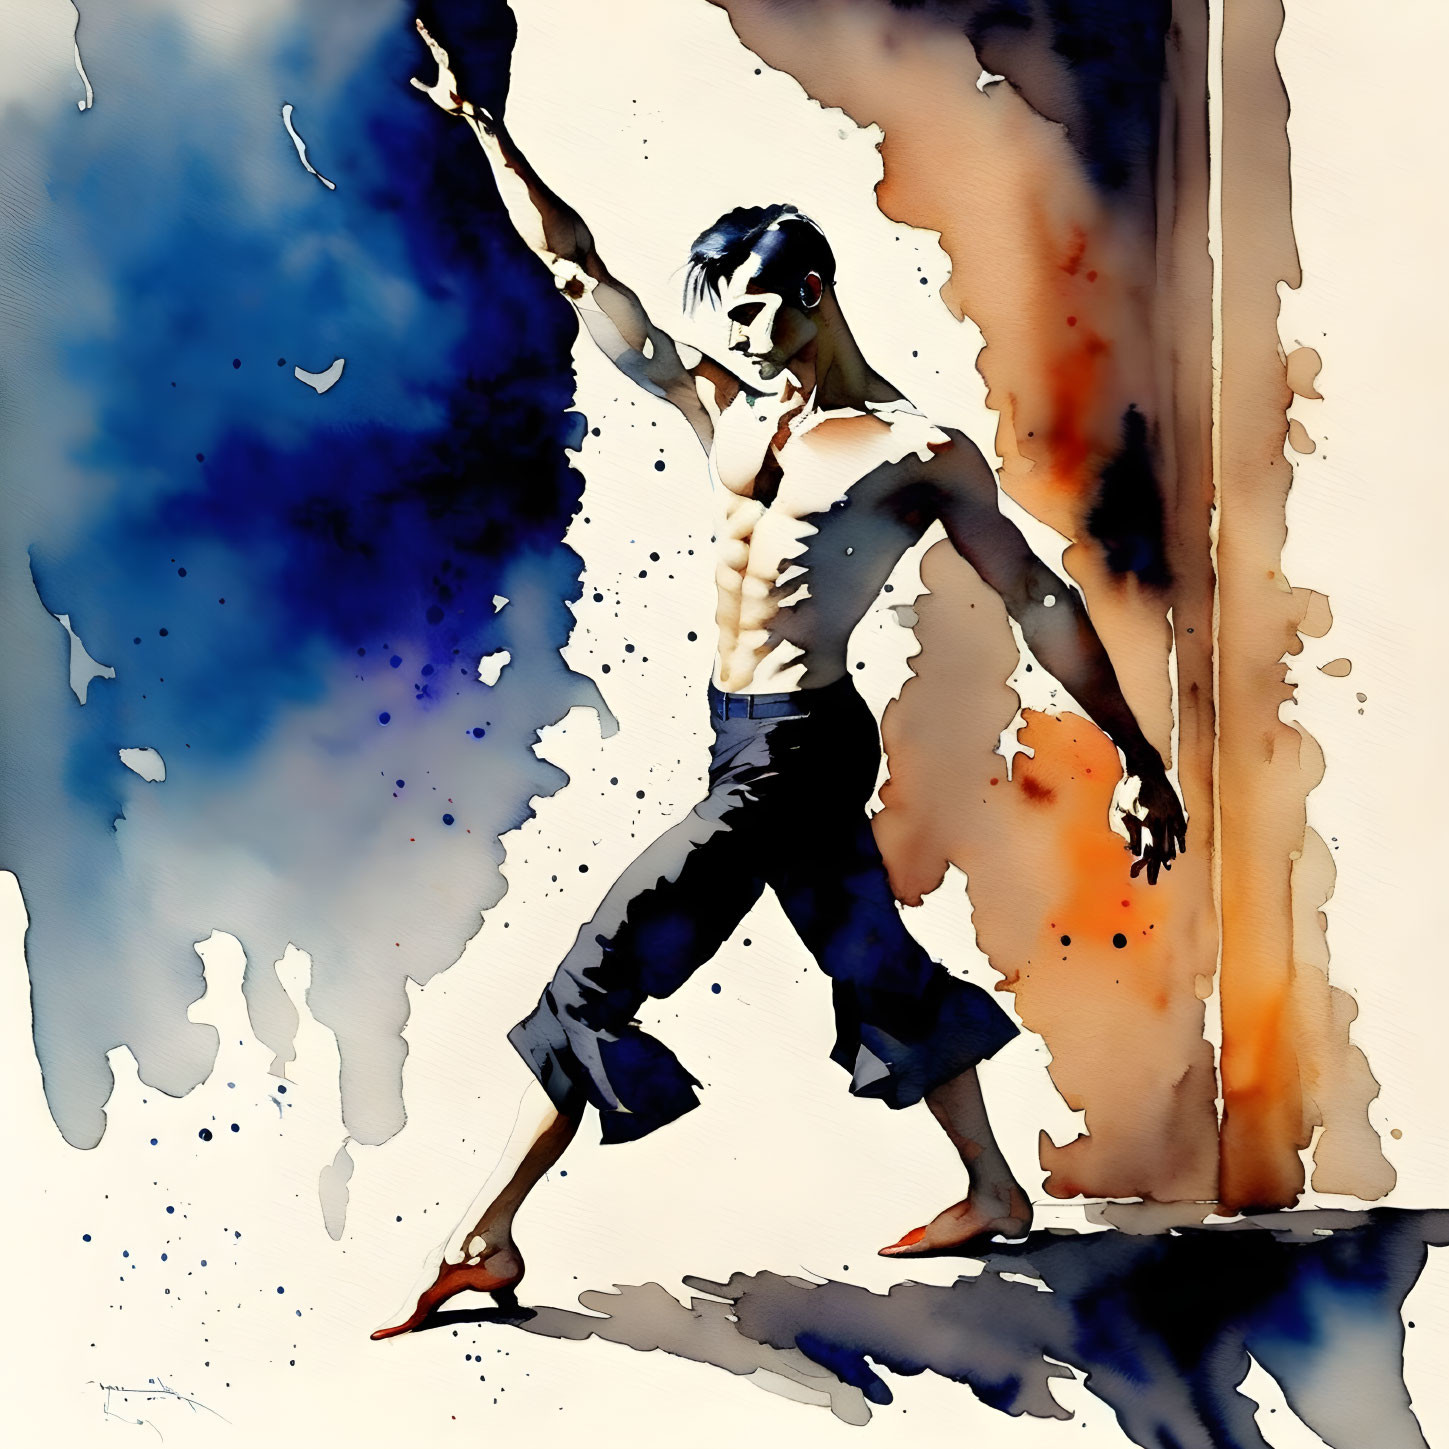 Dynamic Pose Watercolor Painting with Blue and Orange Splashes